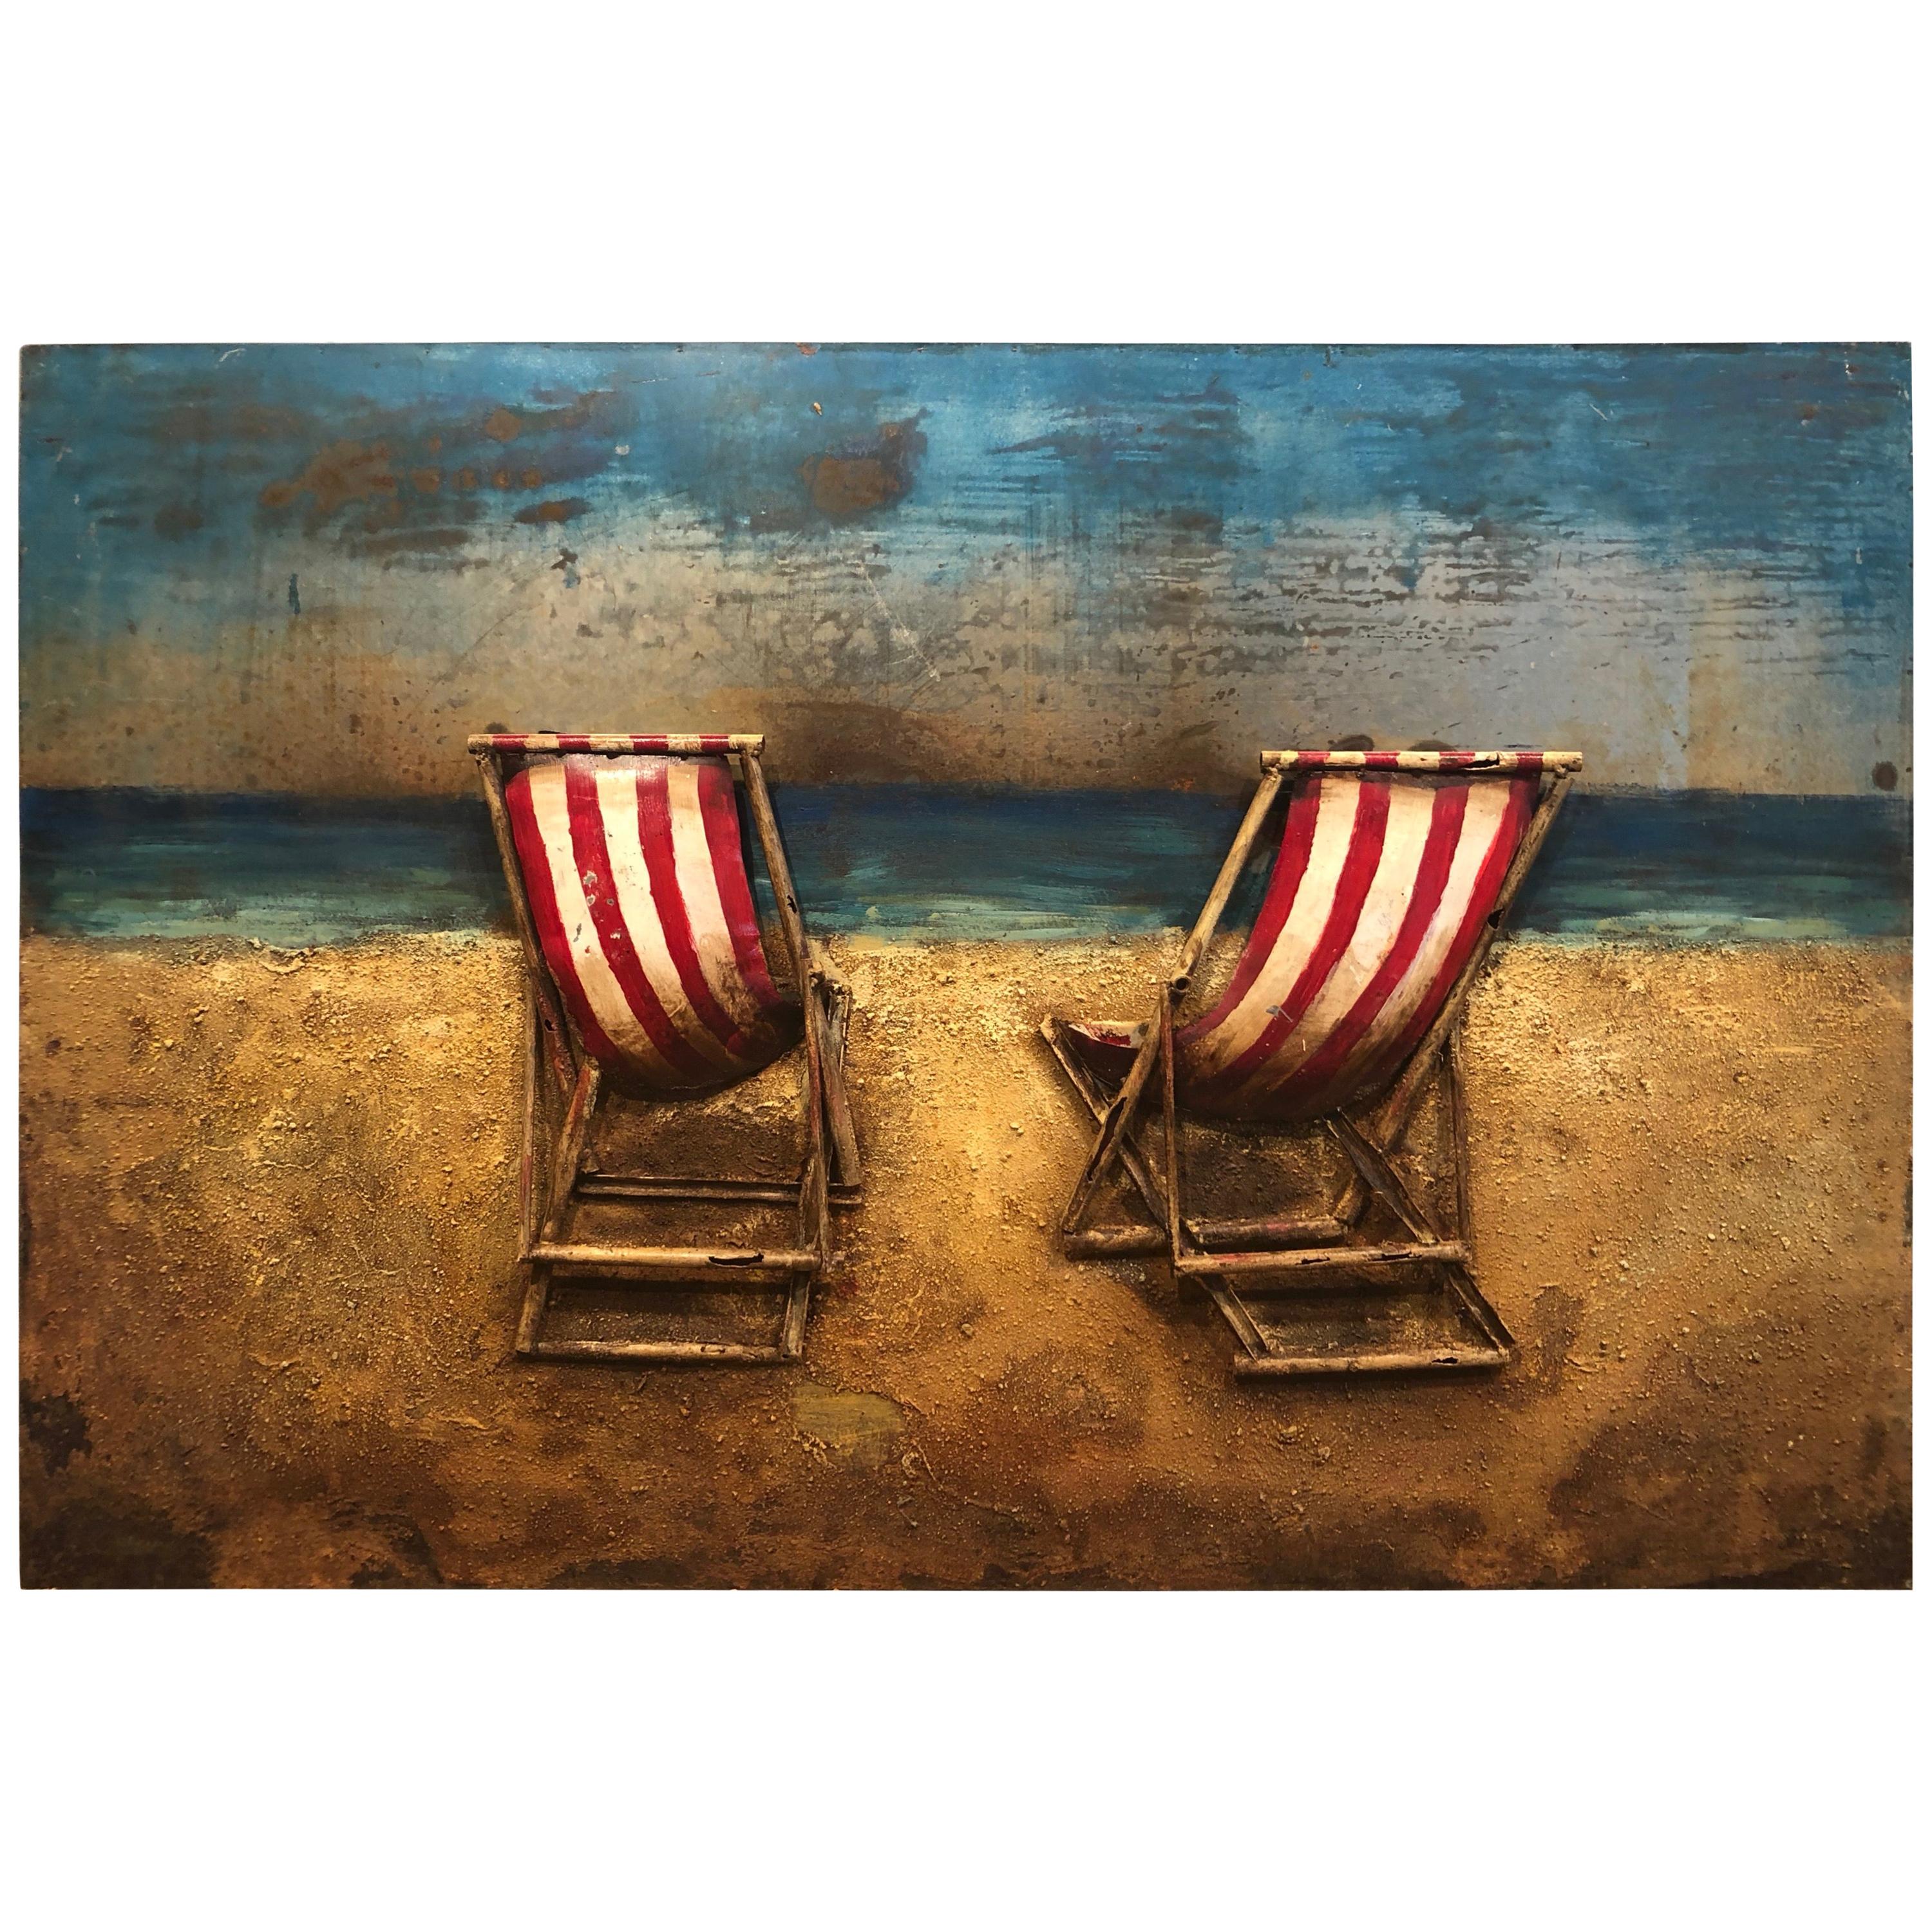 Three-Dimensional Metal and Acrylic Painting of Beach Chairs by the Seaside For Sale